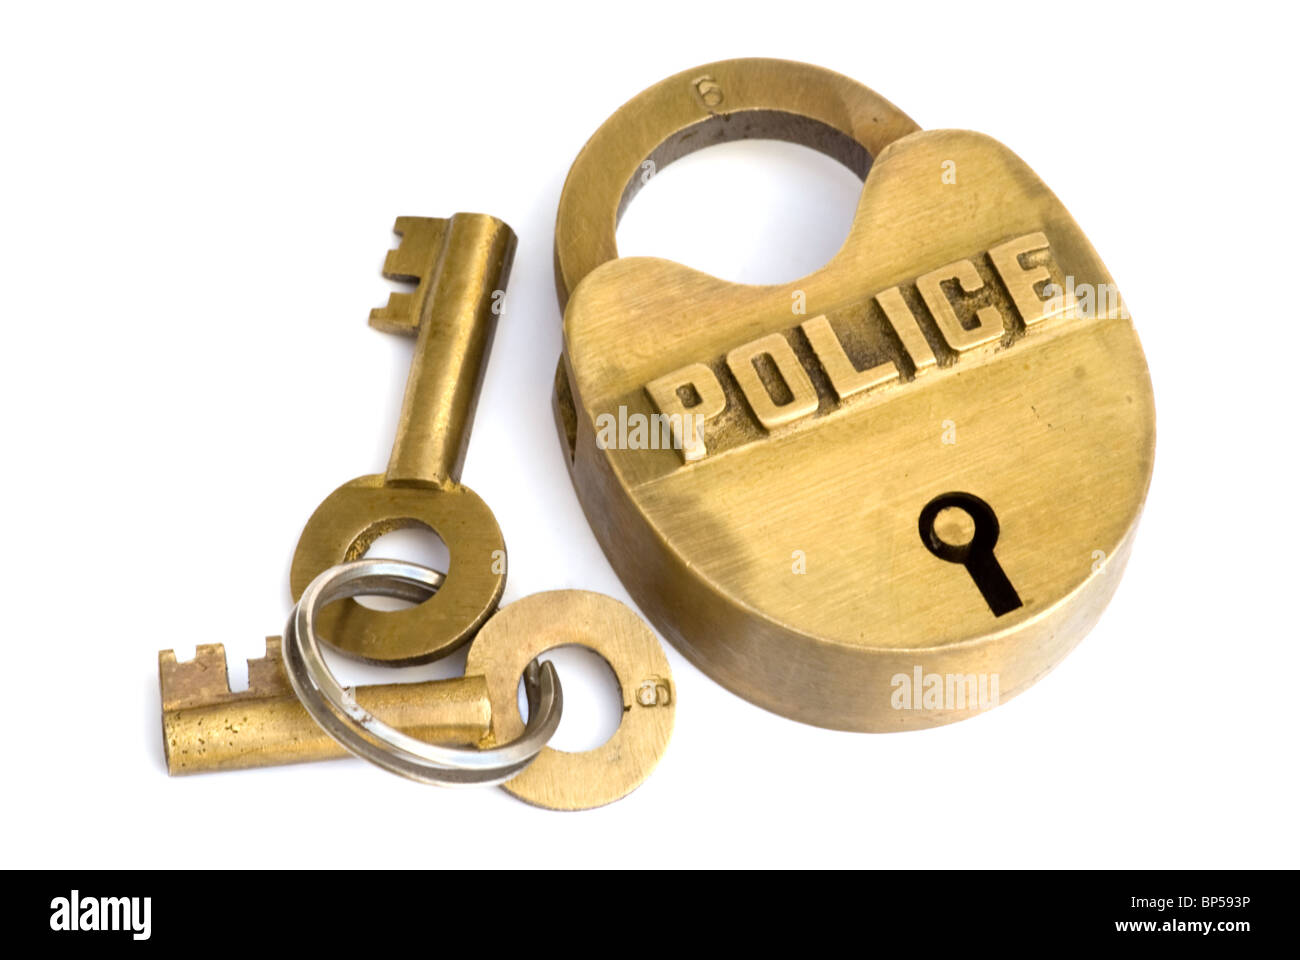 Brass police logo lock with key chain and two keys. The word police is in capital letters above the keyhole. Stock Photo